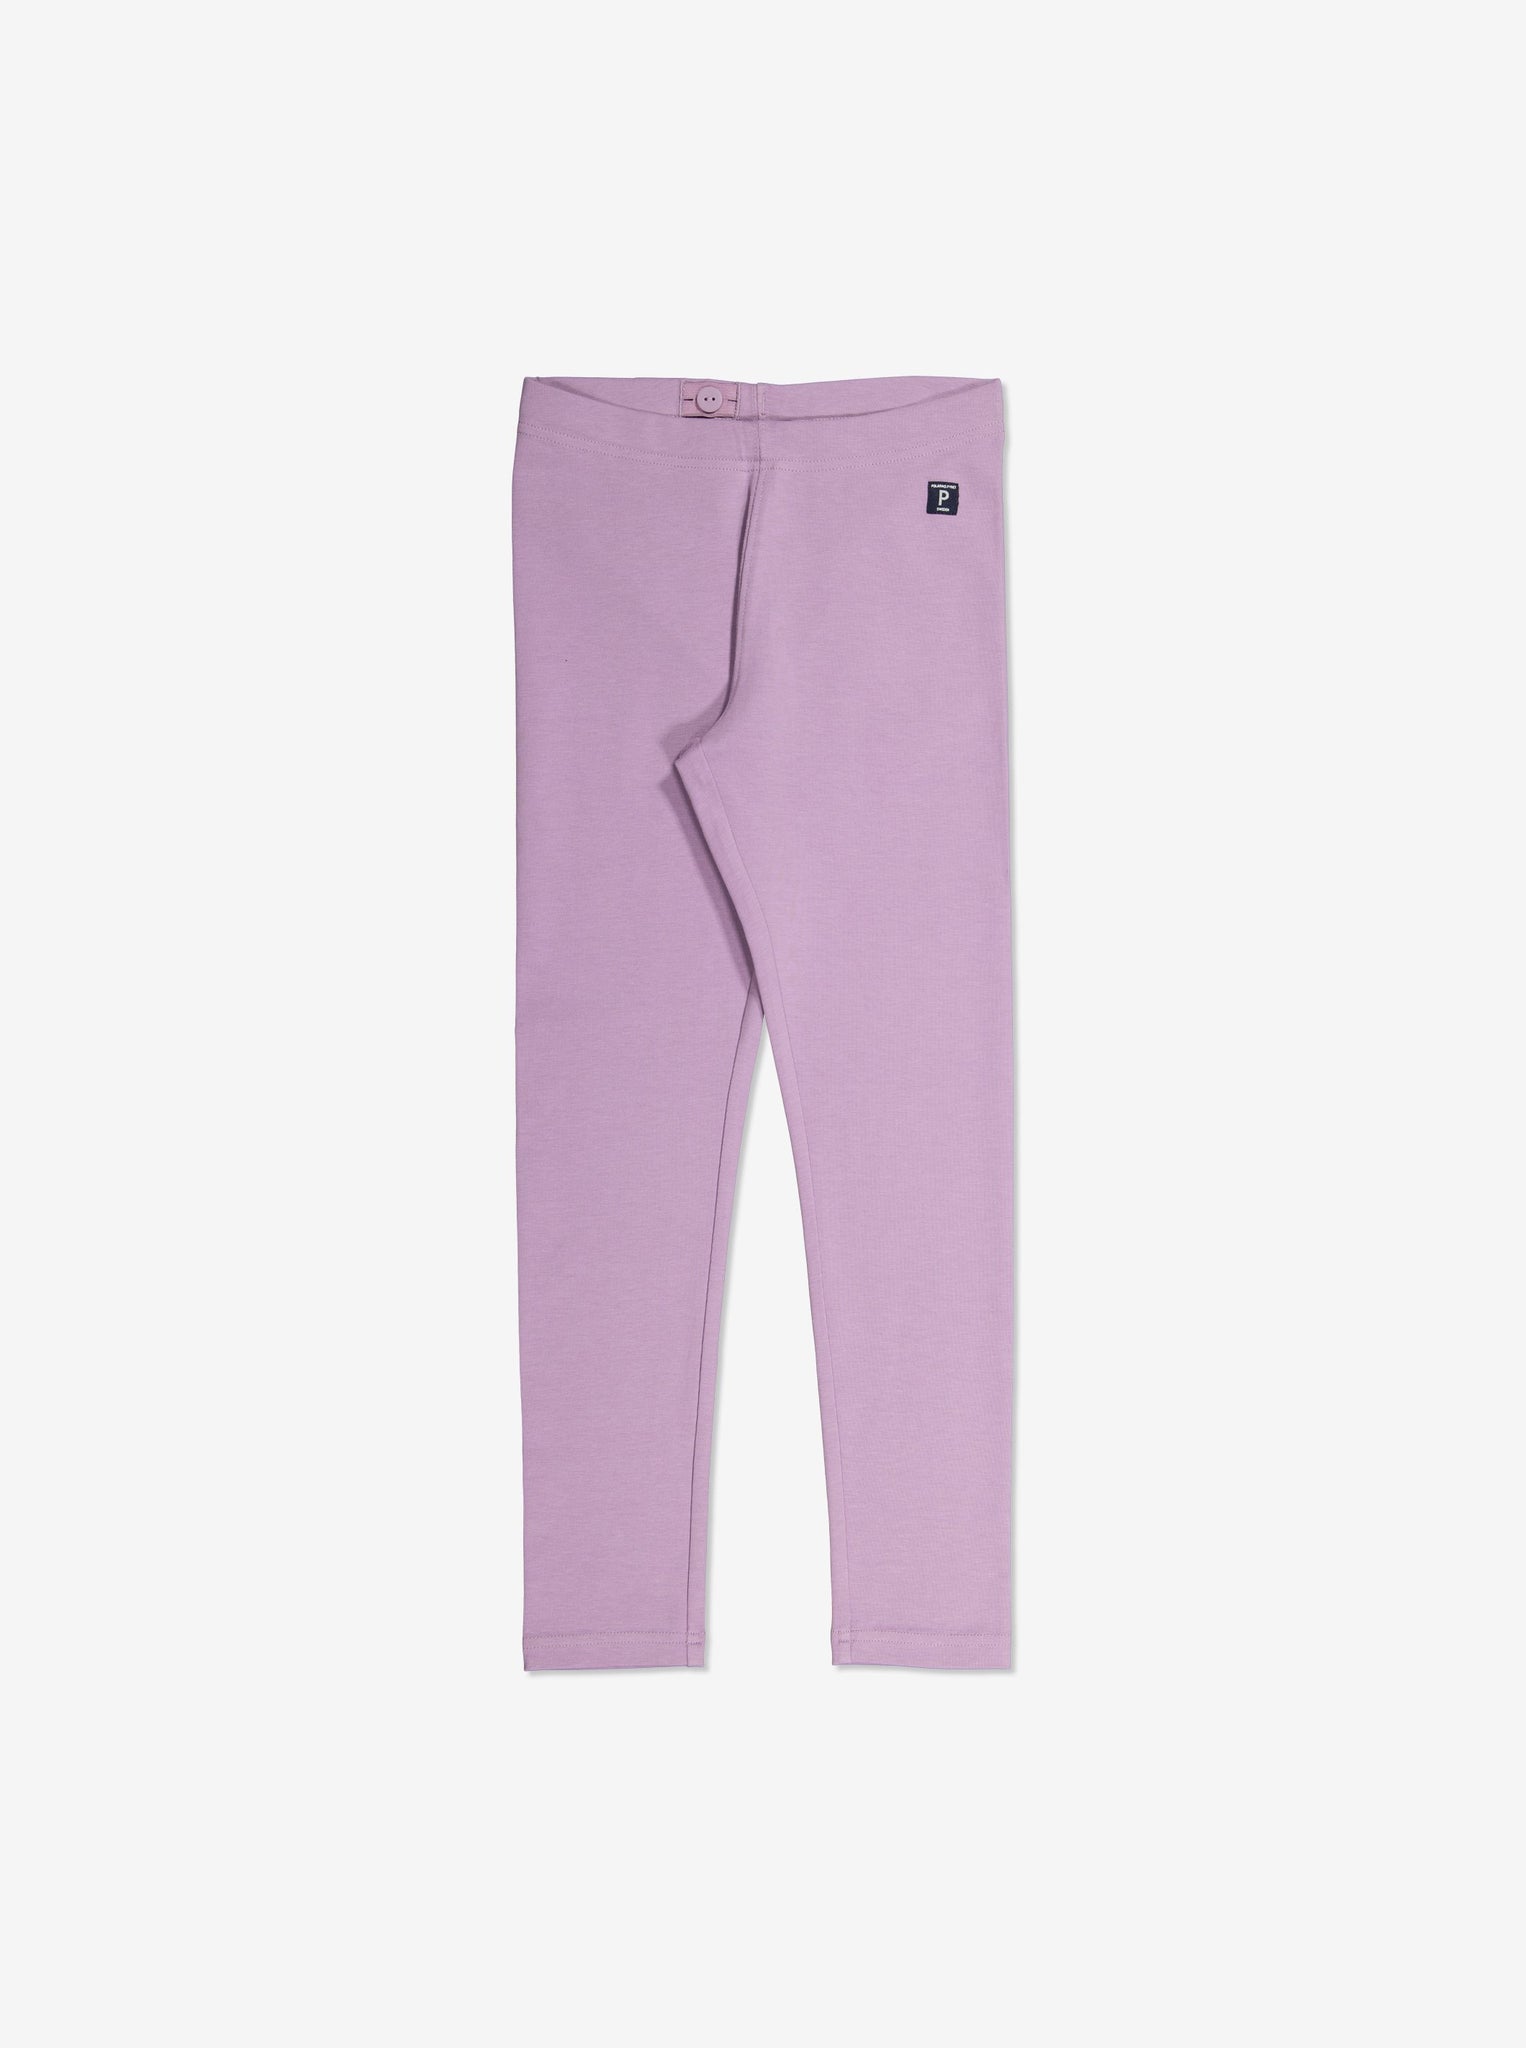  Organic Cotton Pink Kids Leggings from Polarn O. Pyret Kidswear. Made from environmentally friendly materials.